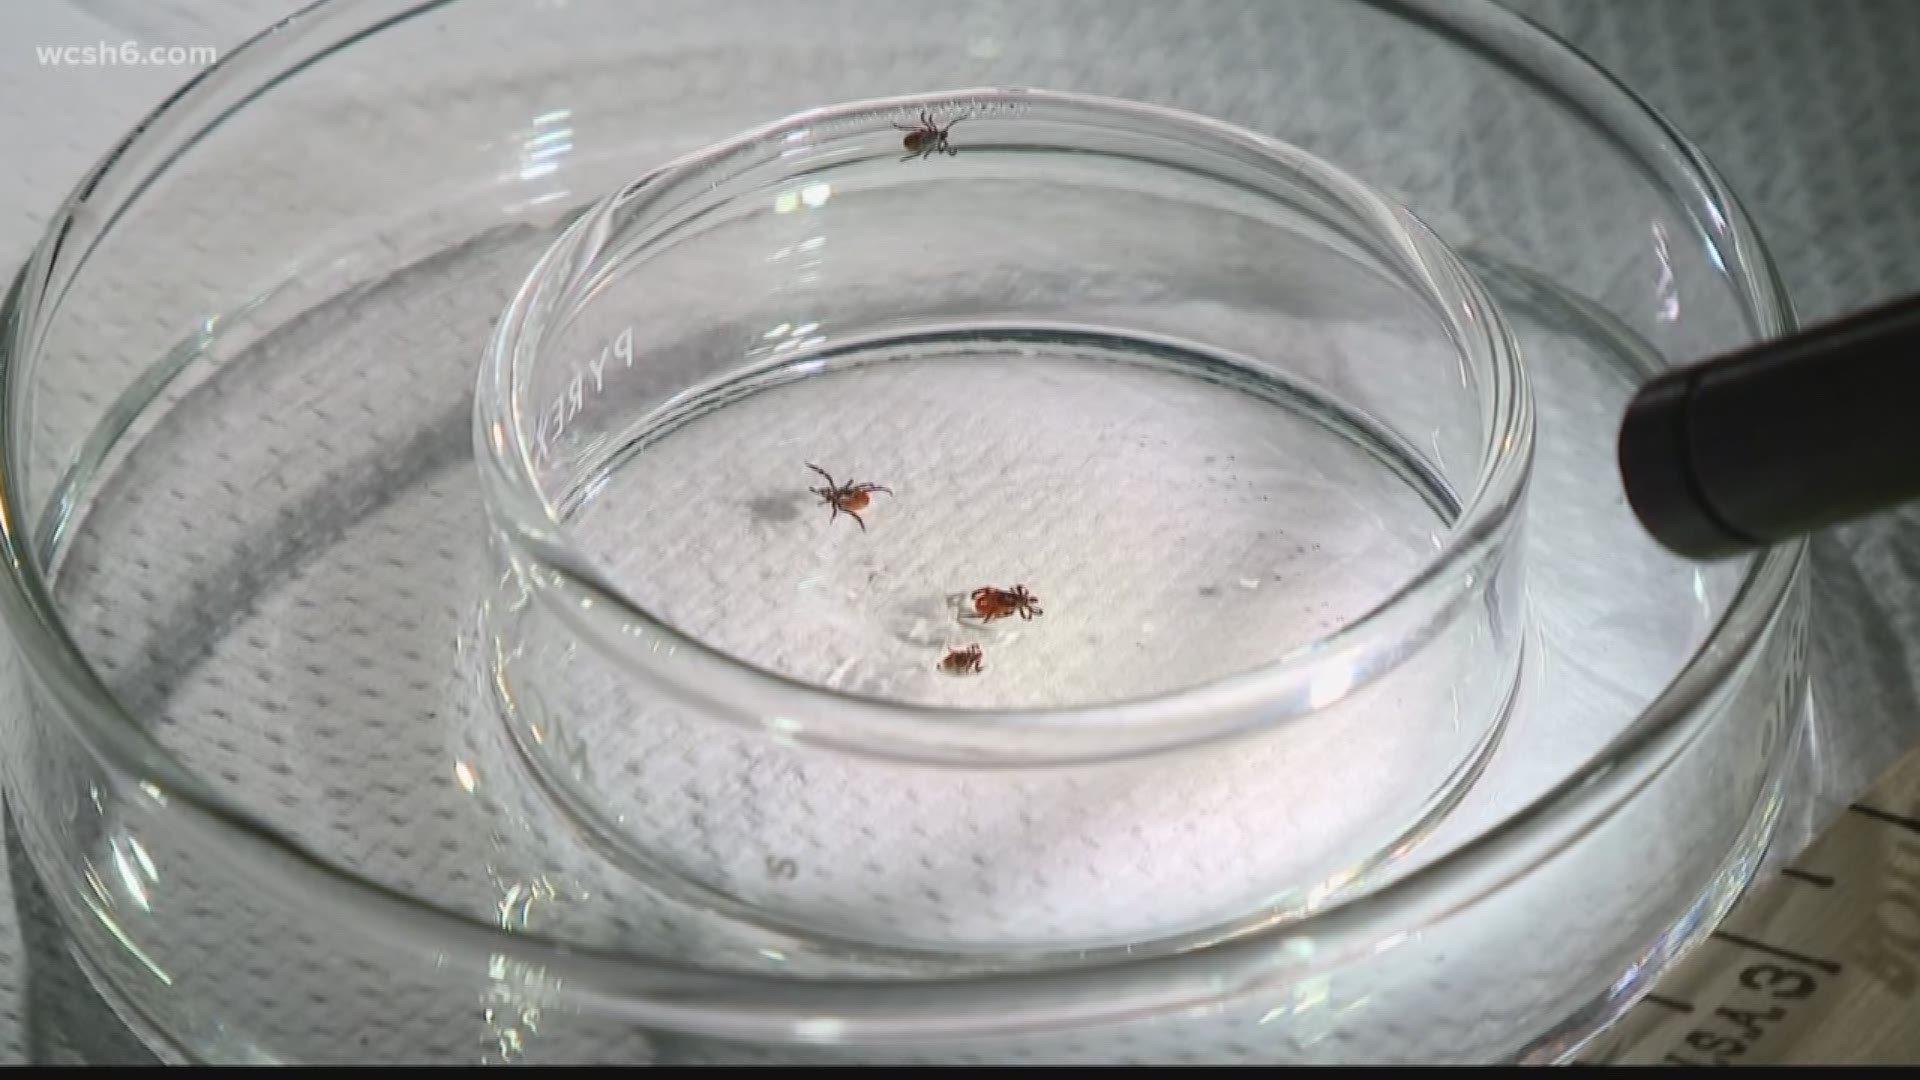 Tick Research on An Island in Maine without Any Mice